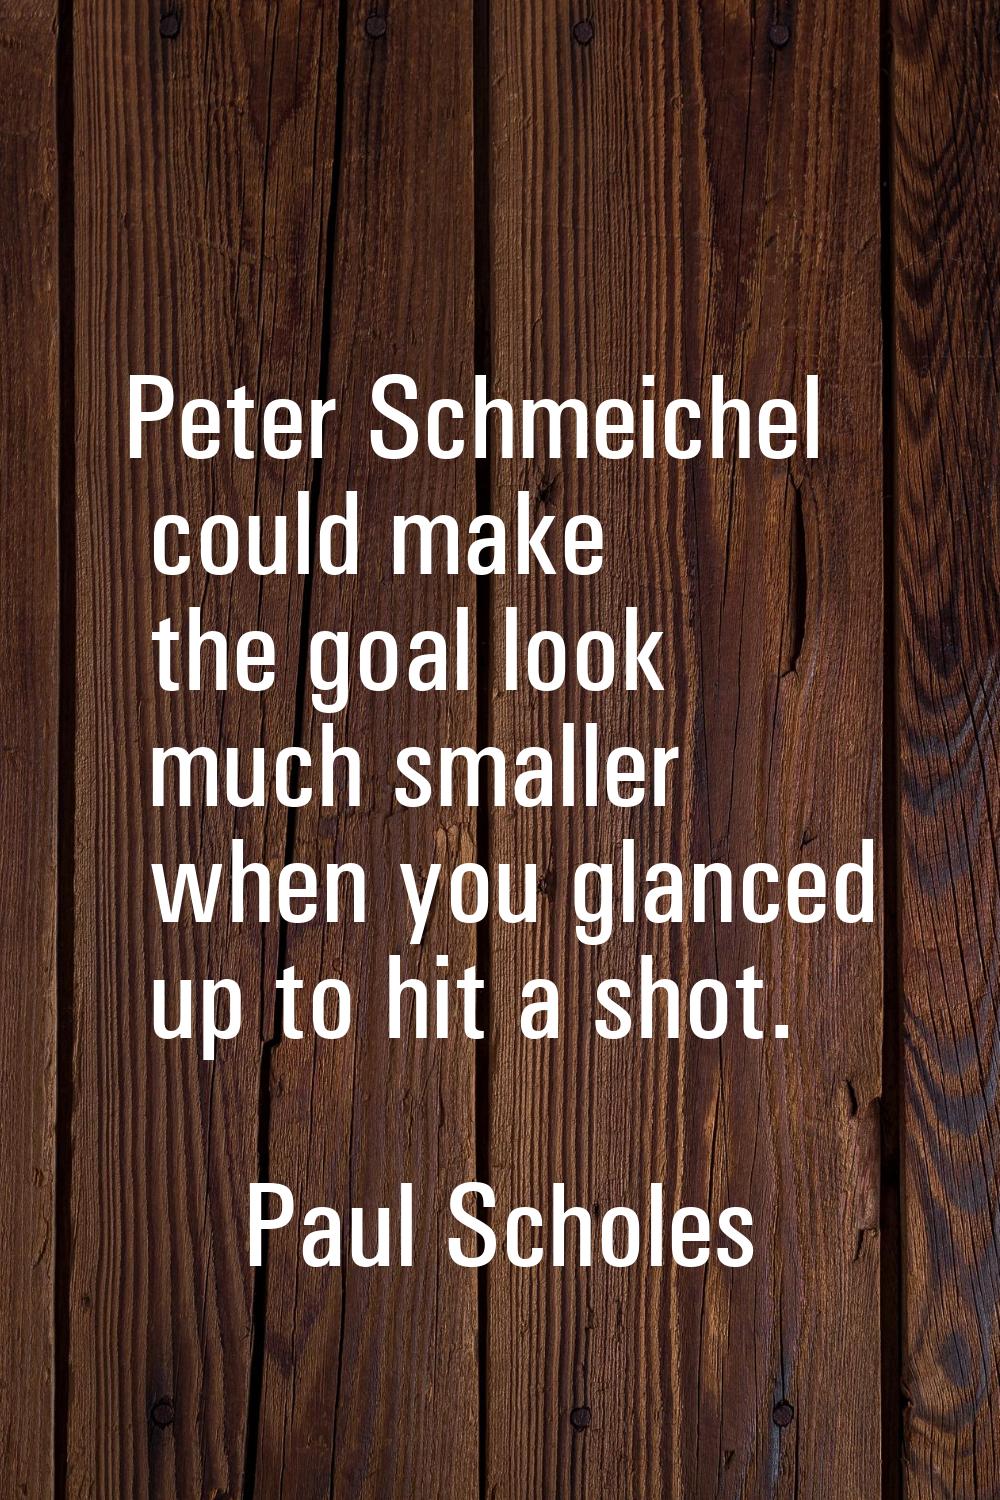 Peter Schmeichel could make the goal look much smaller when you glanced up to hit a shot.